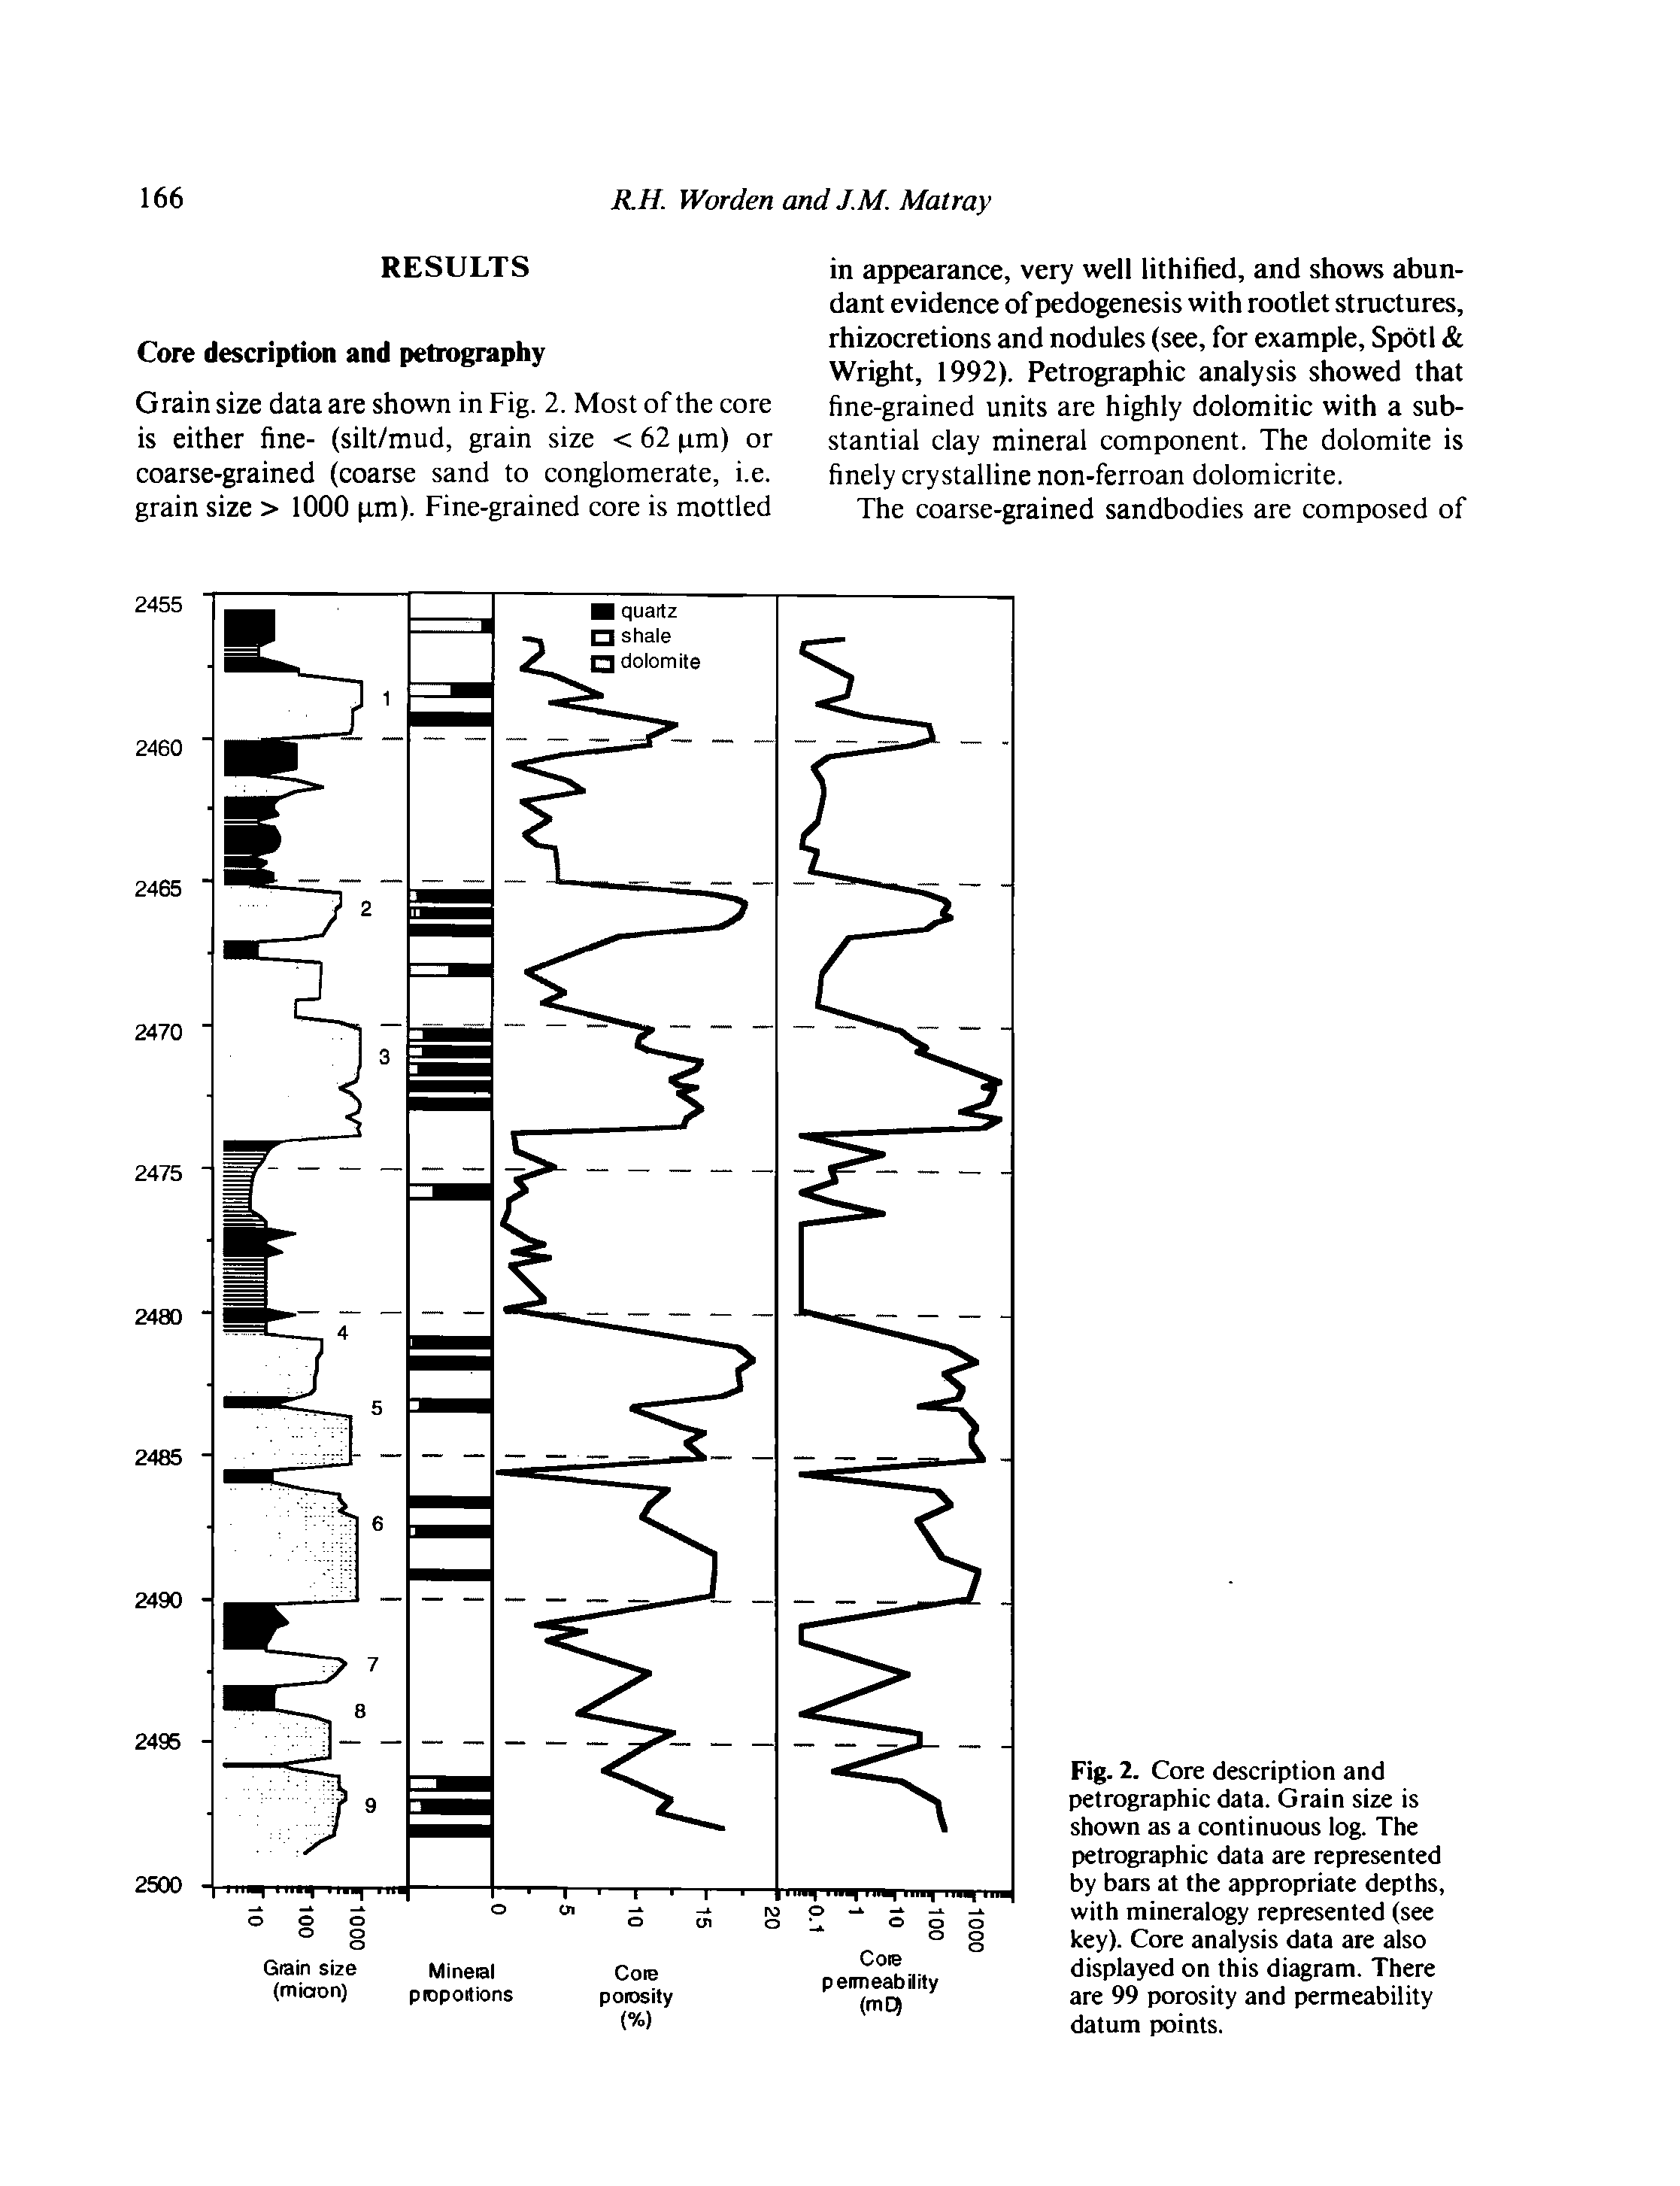 Fig. 2. Core description and petrographic data. Grain size is shown as a continuous log. The petrographic data are represented by bars at the appropriate depths, with mineralogy represented (see key). Core analysis data are also displayed on this diagram. There are 99 porosity and permeability datum points.